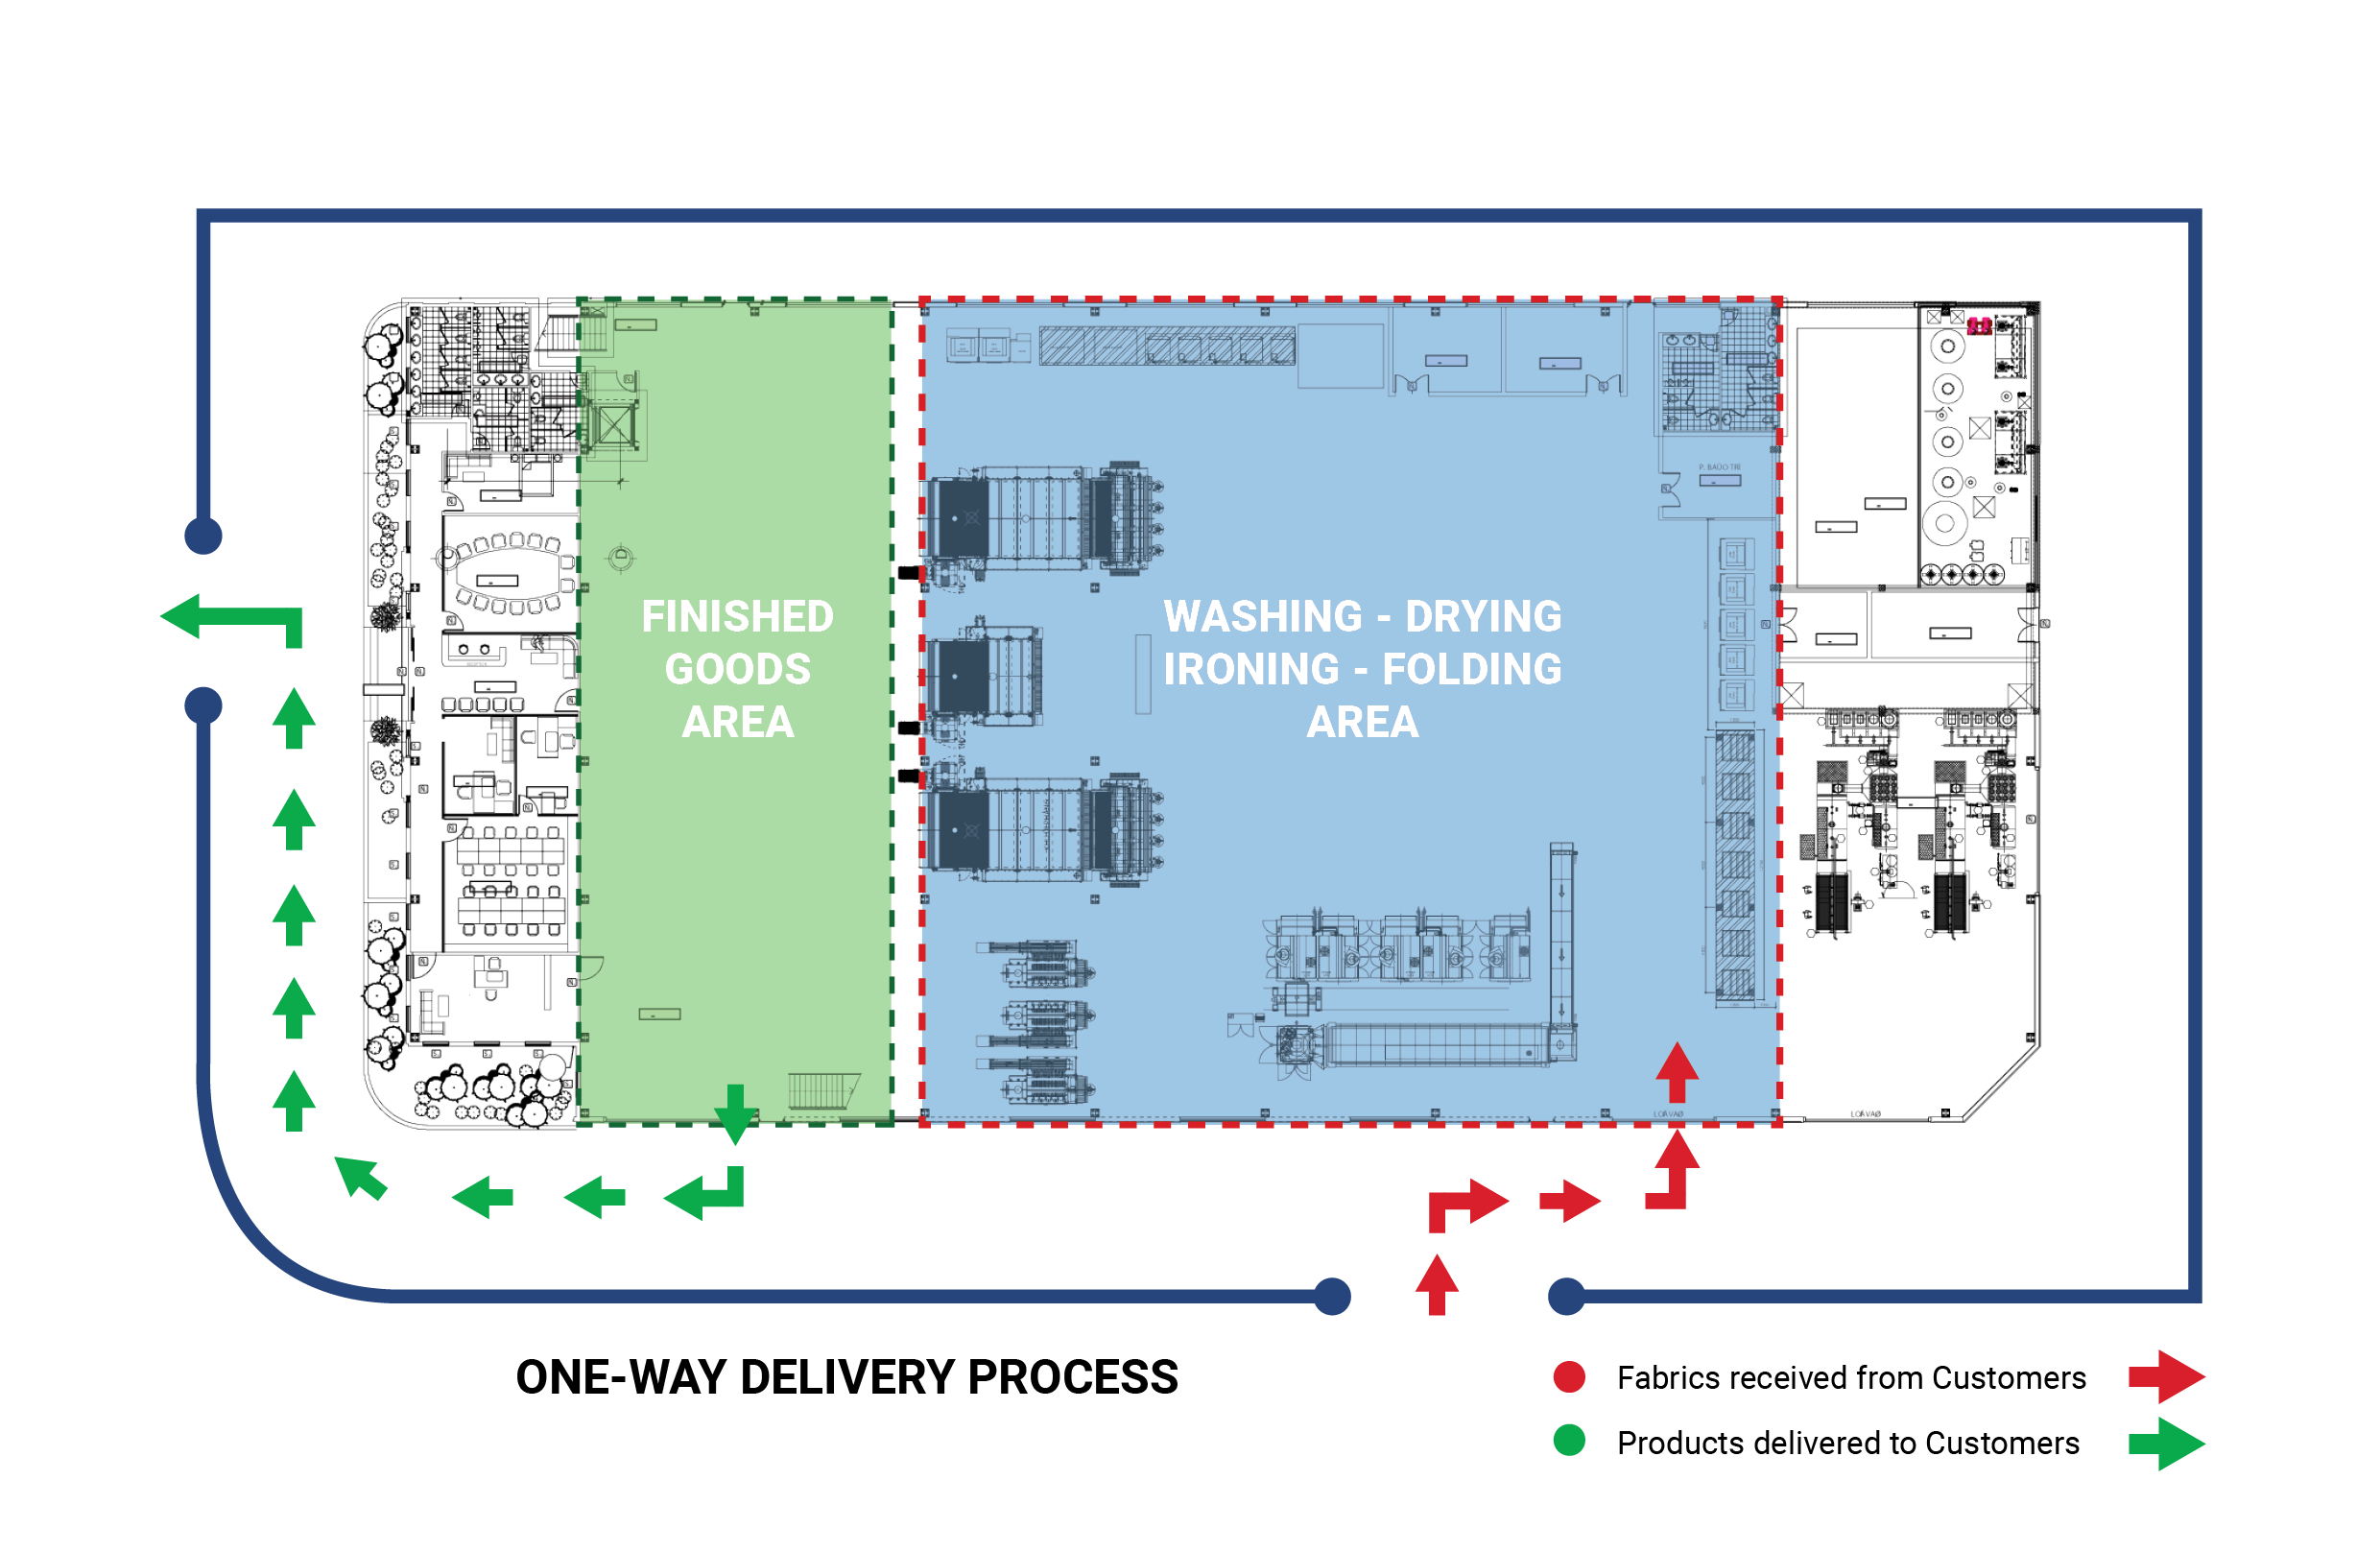 One-way delivery process